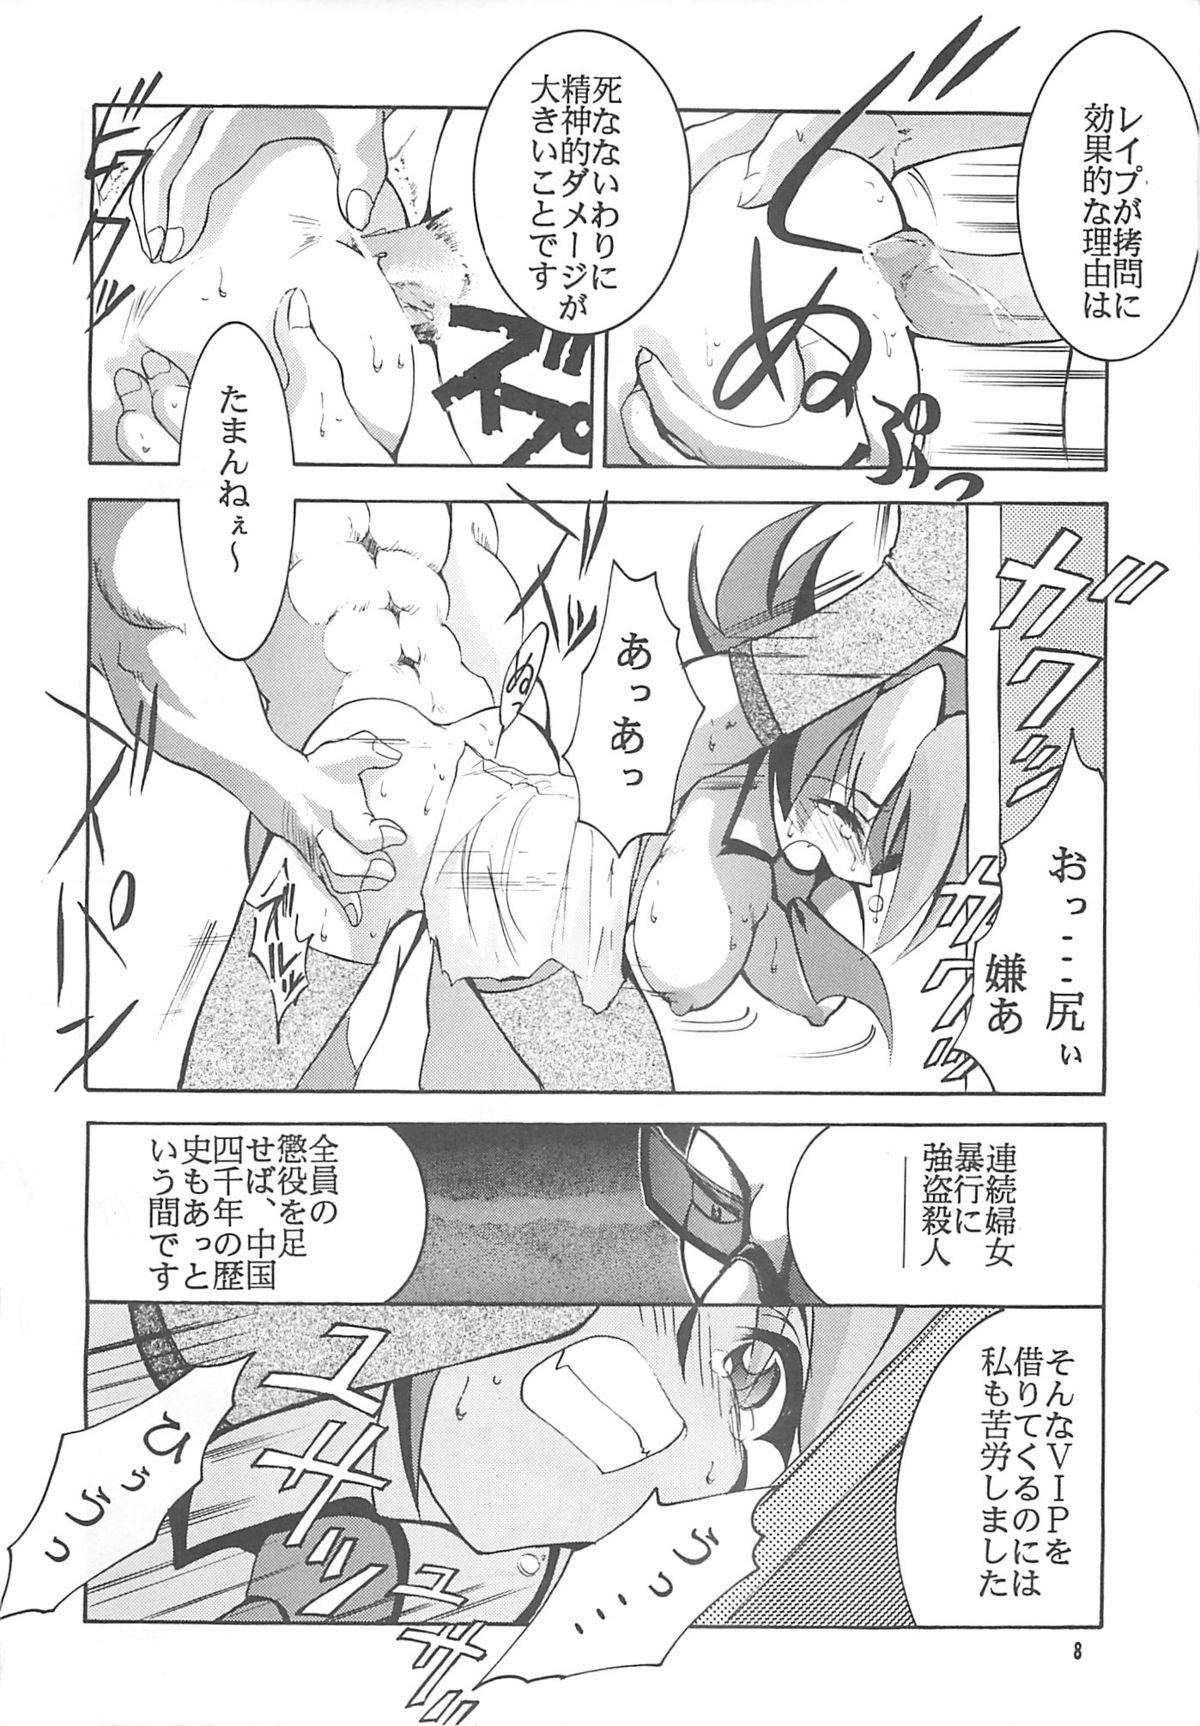 Submissive TEN - Slayers Saber marionette Betterman Hard Cock - Page 7